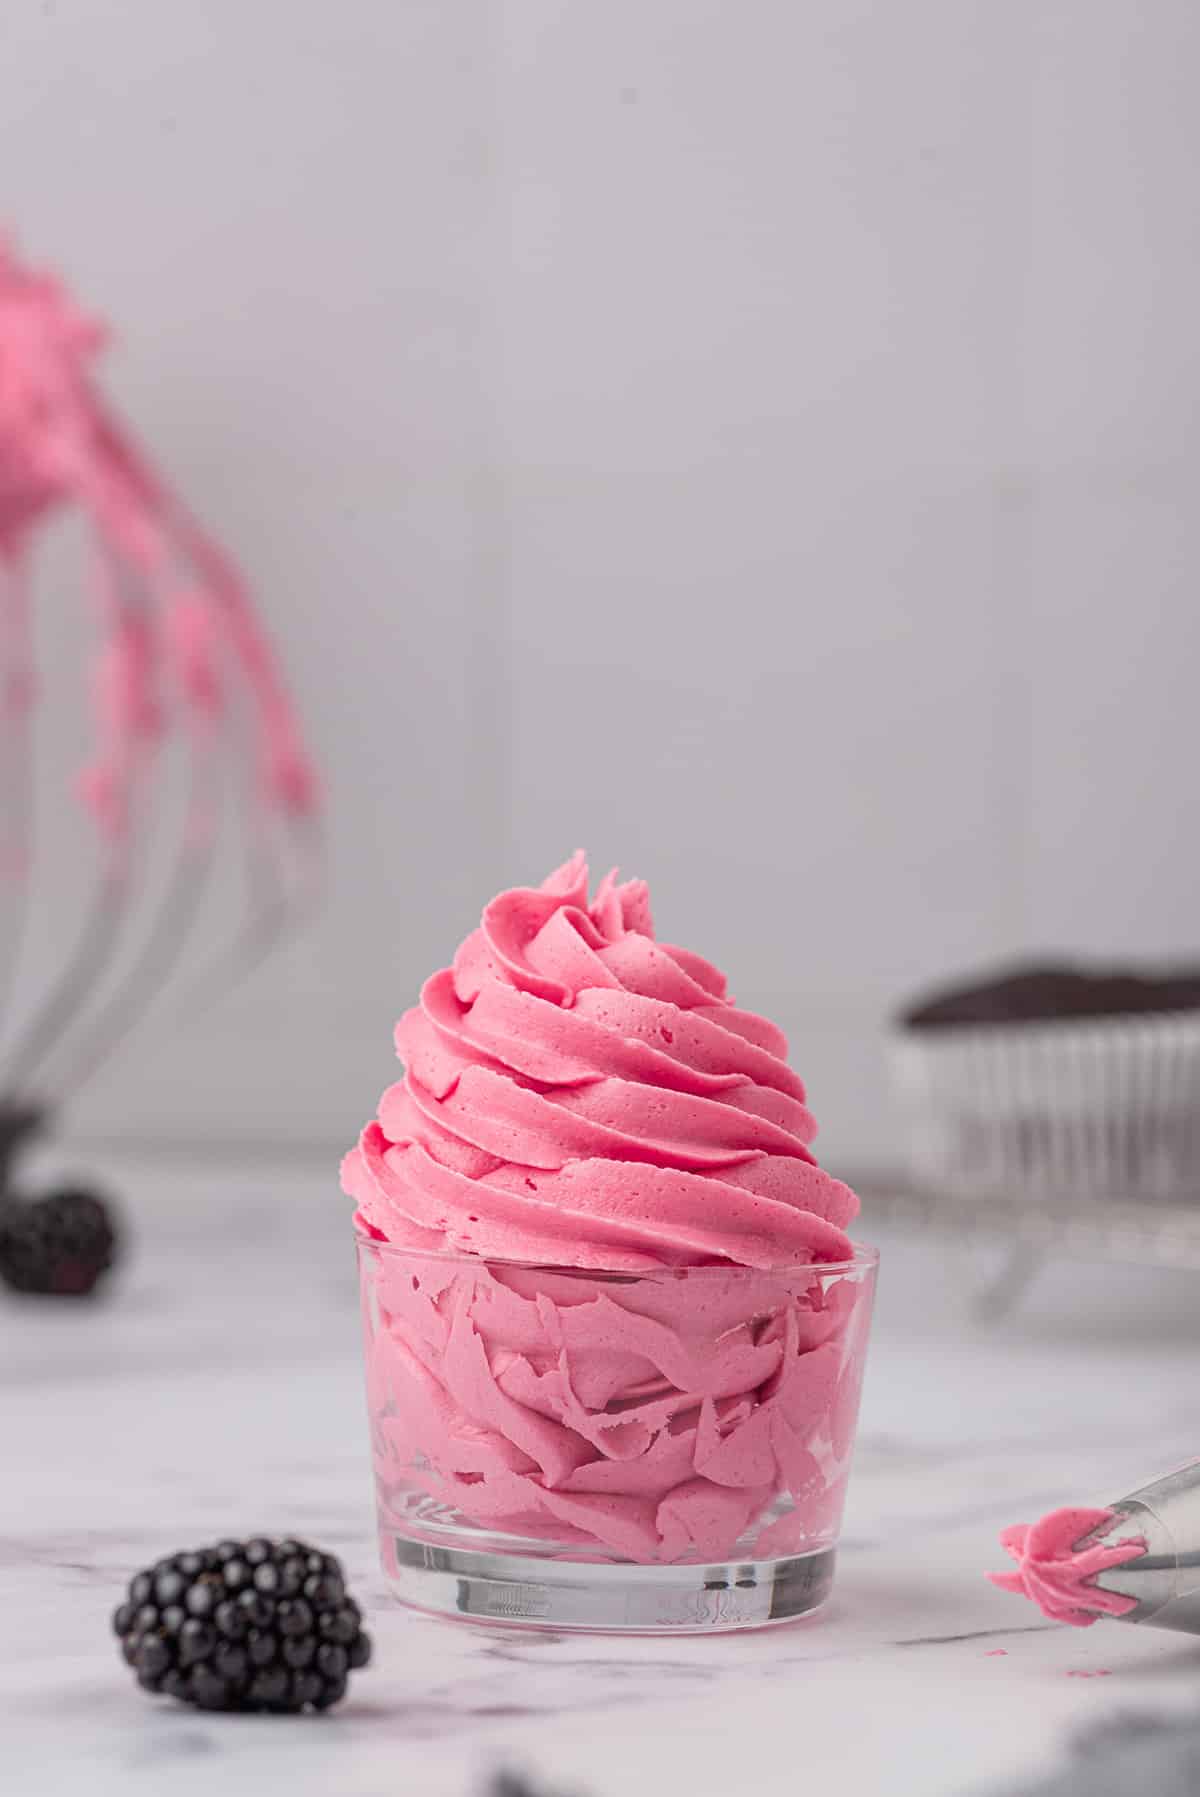 A glass filled with pink blackberry buttercream frosting.